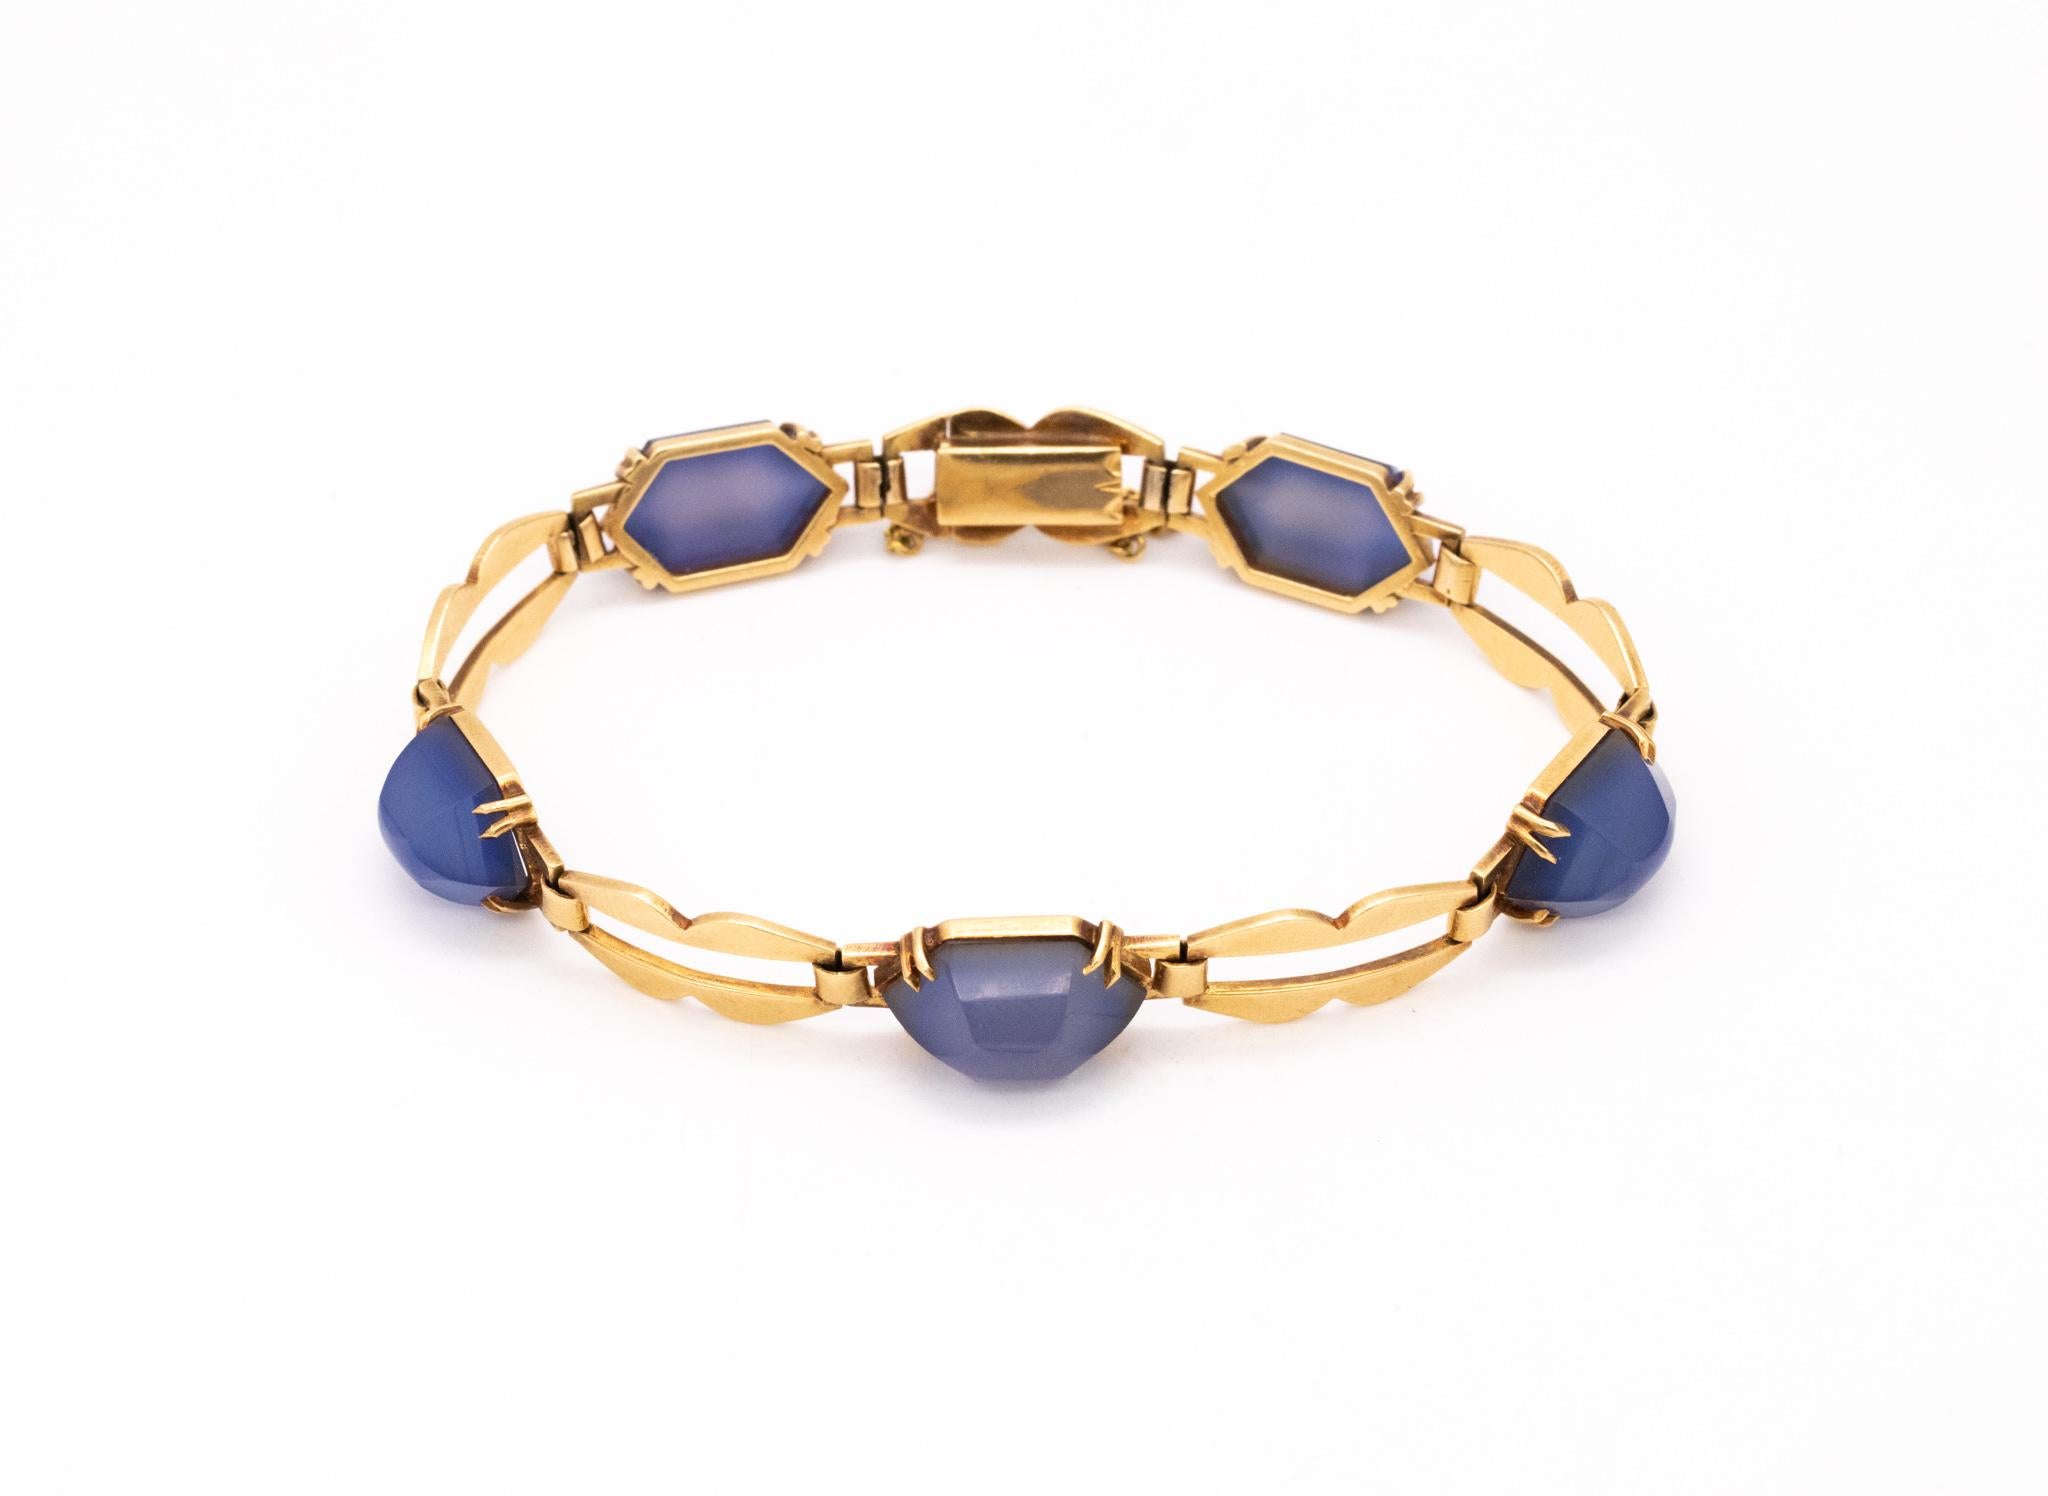 French 1930 Art Deco Bracelet In 18Kt Yellow Gold With 35 Cts Of Blue Chalcedony For Sale 4